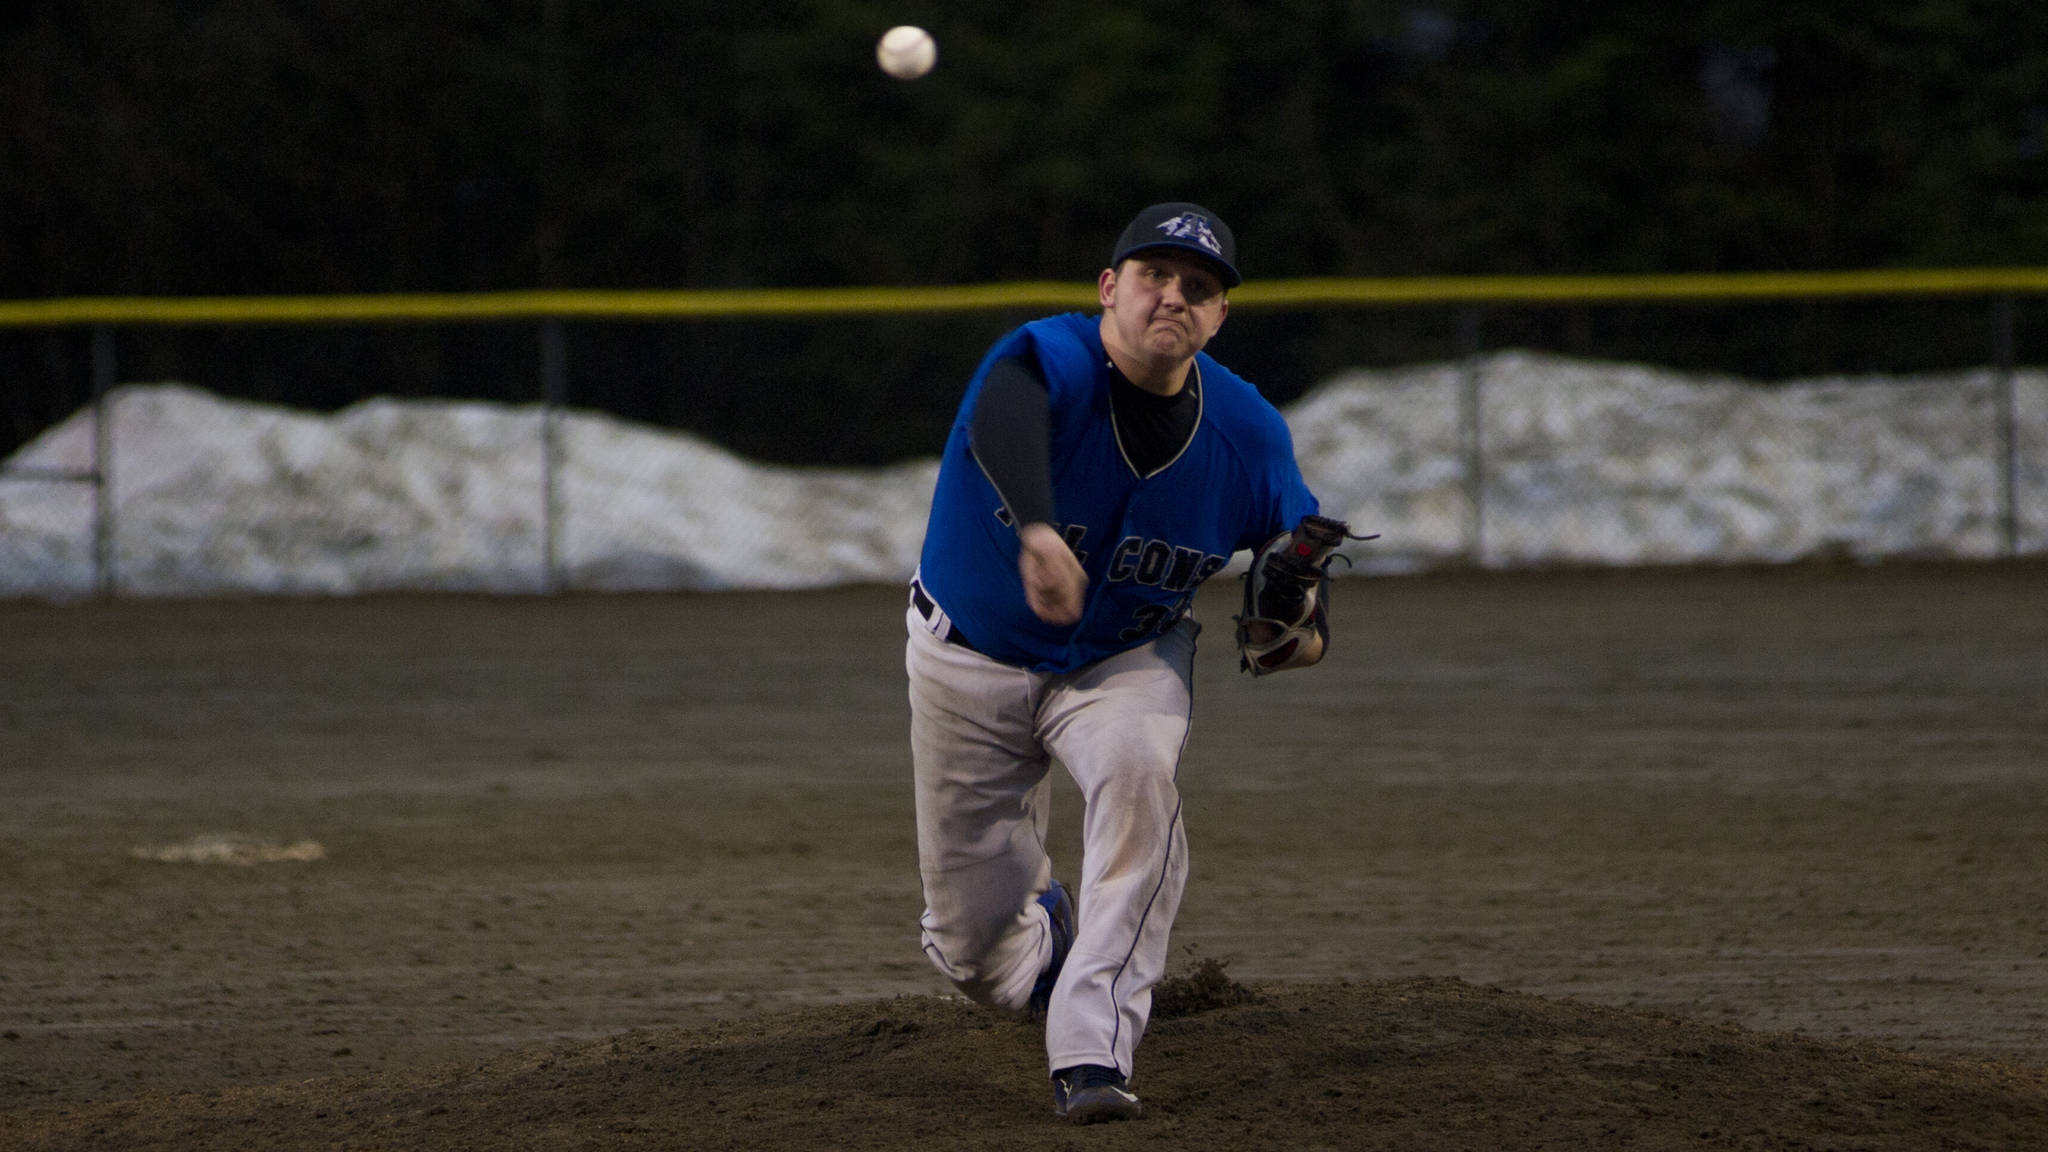 Thunder Mountain’s Bobby Cox pitches against Juneau-Douglas High School on Monday night at Adair-Kennedy Memorial Park. Cox allowed just two hits in a little over five innings of work. (Nolin Ainsworth | Juneau Empire)